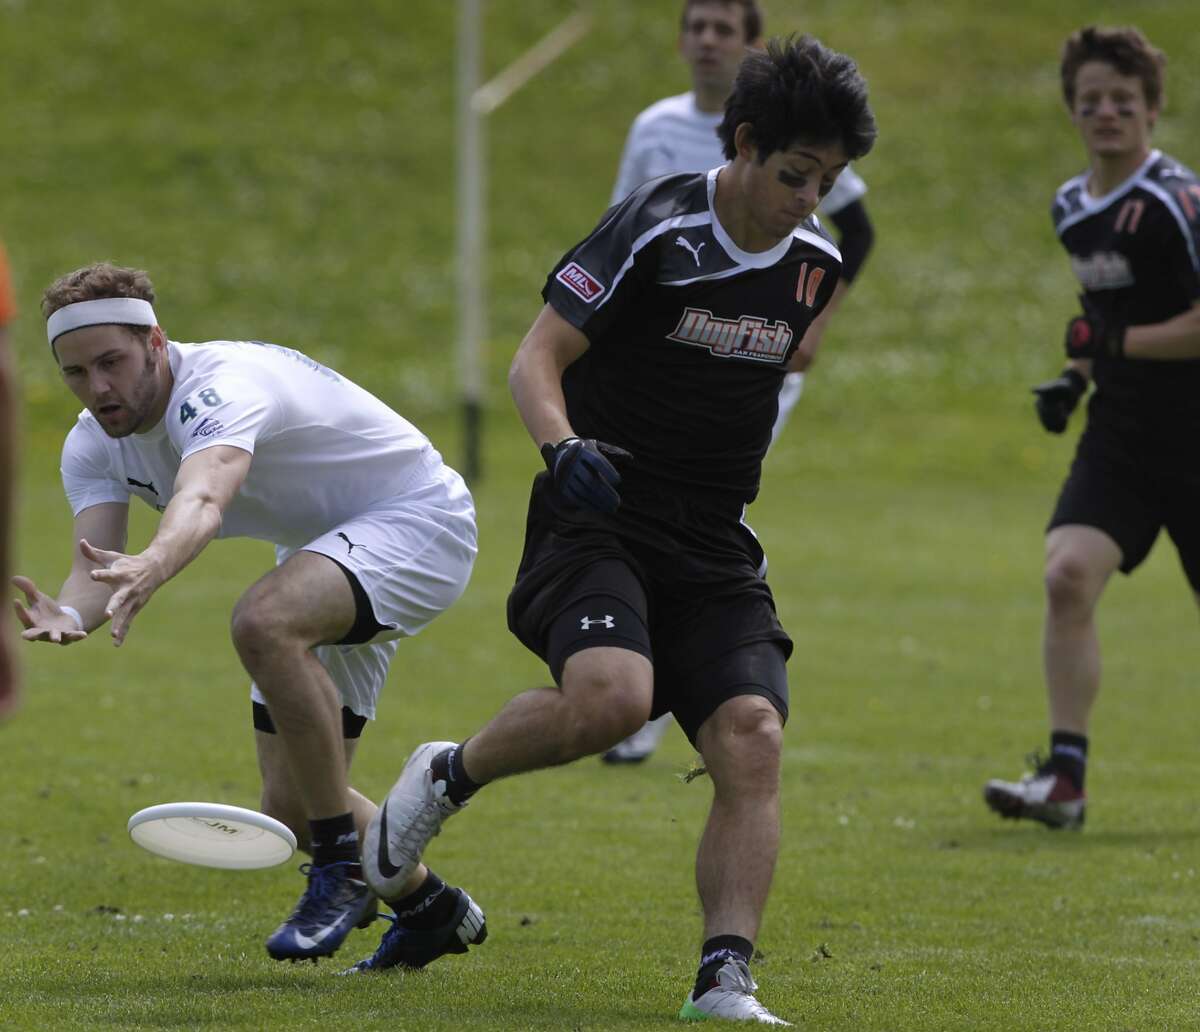 2 ultimate Frisbee leagues throwing into wind